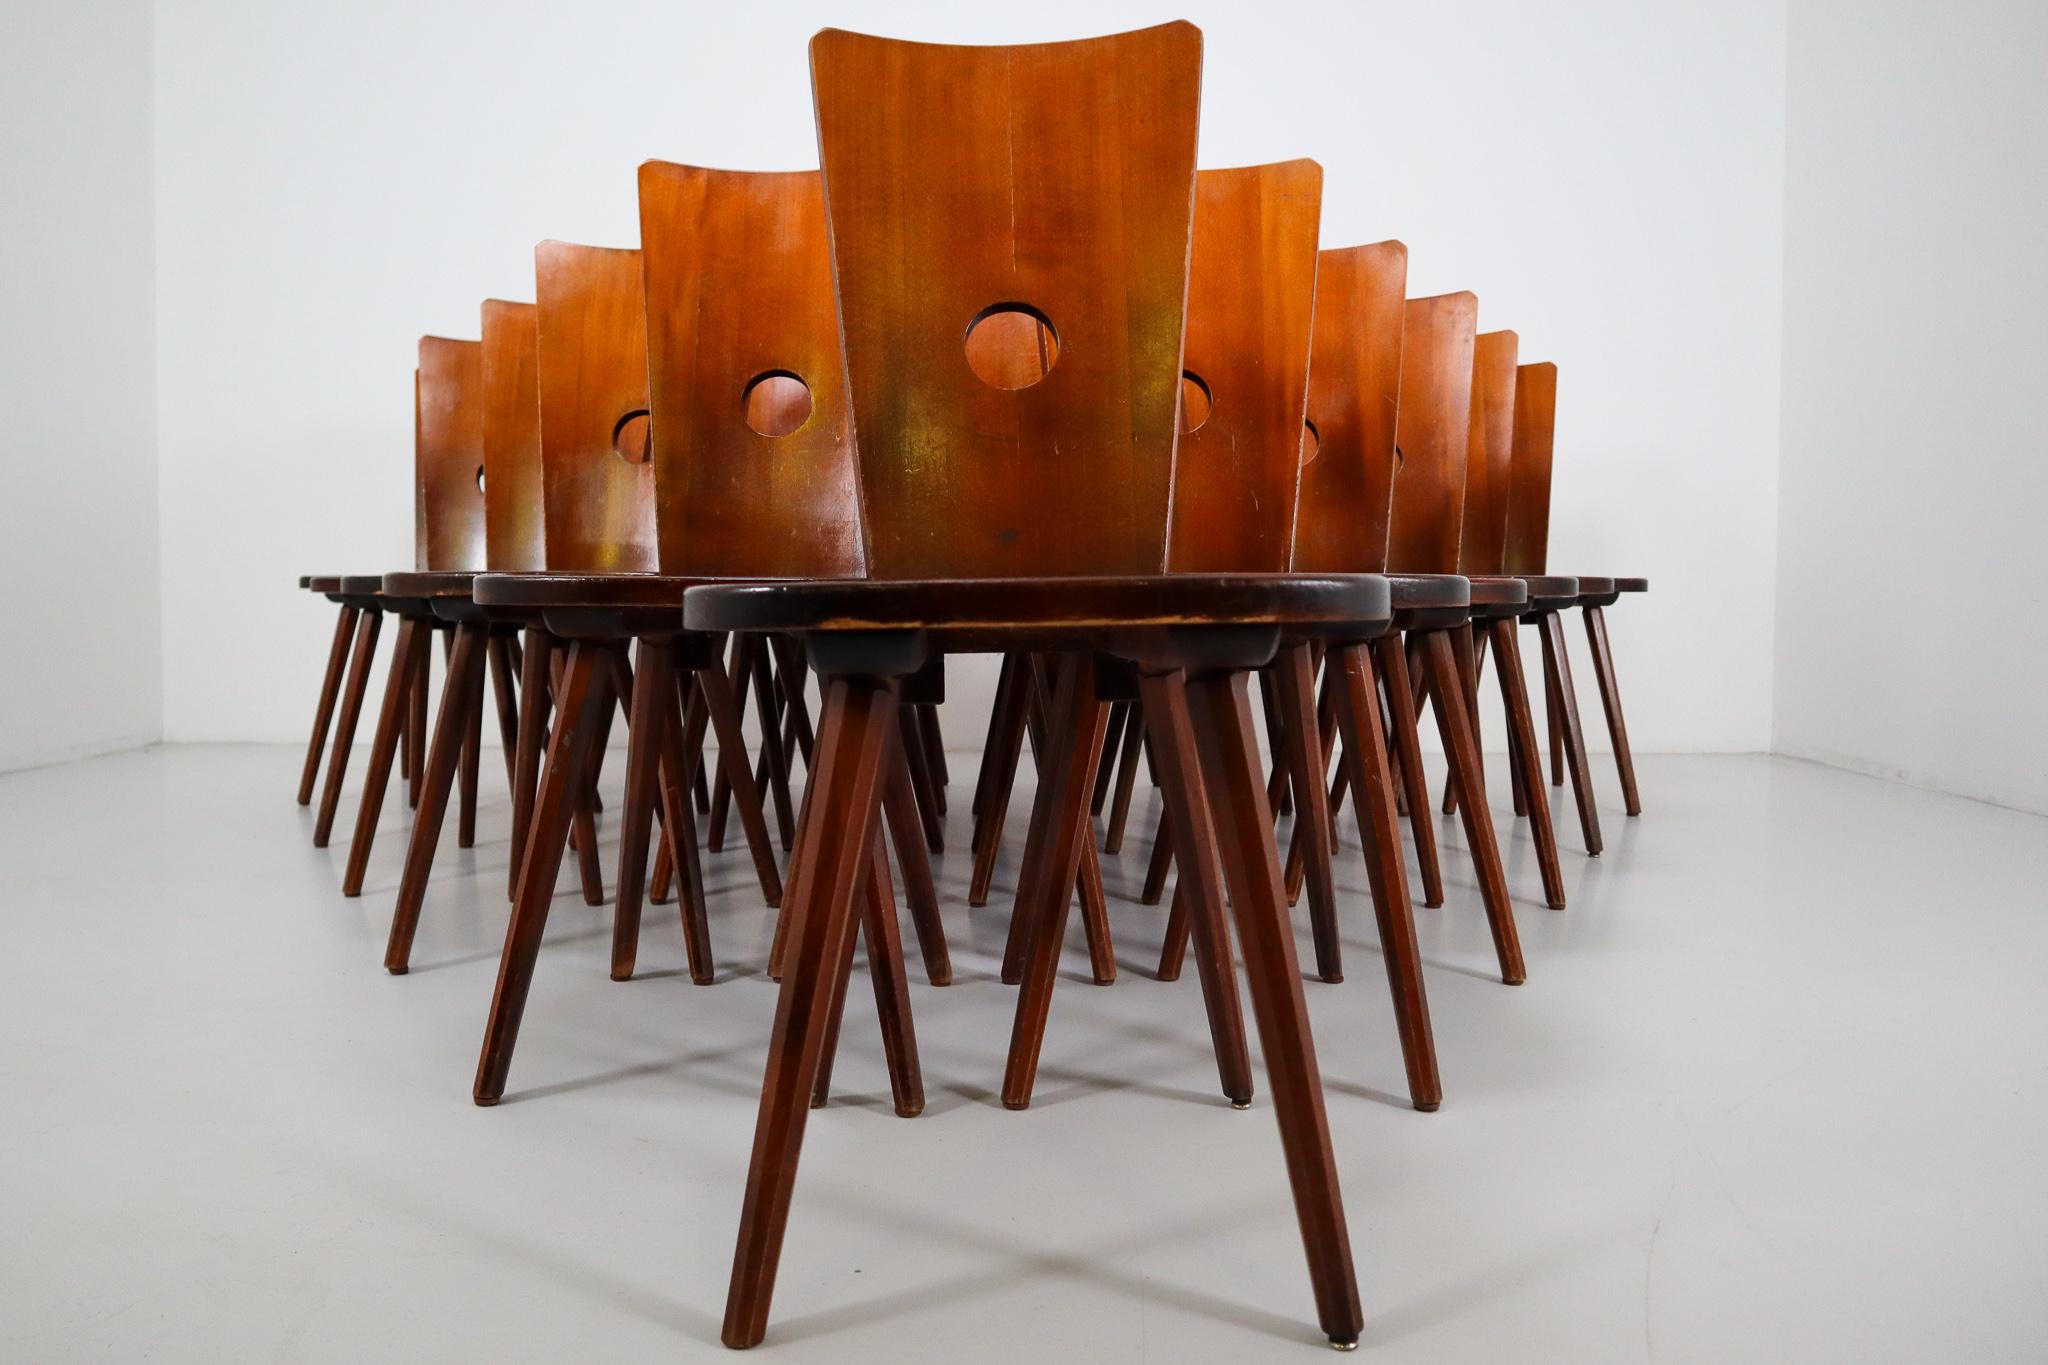 Very Primitive set of beech wooden chairs in the style of Olavi Hänninen. These chairs are made of beechwood and sculpturally crafted by hand. Very minimalistic, yet Primitive shaped and in admirable original condition.